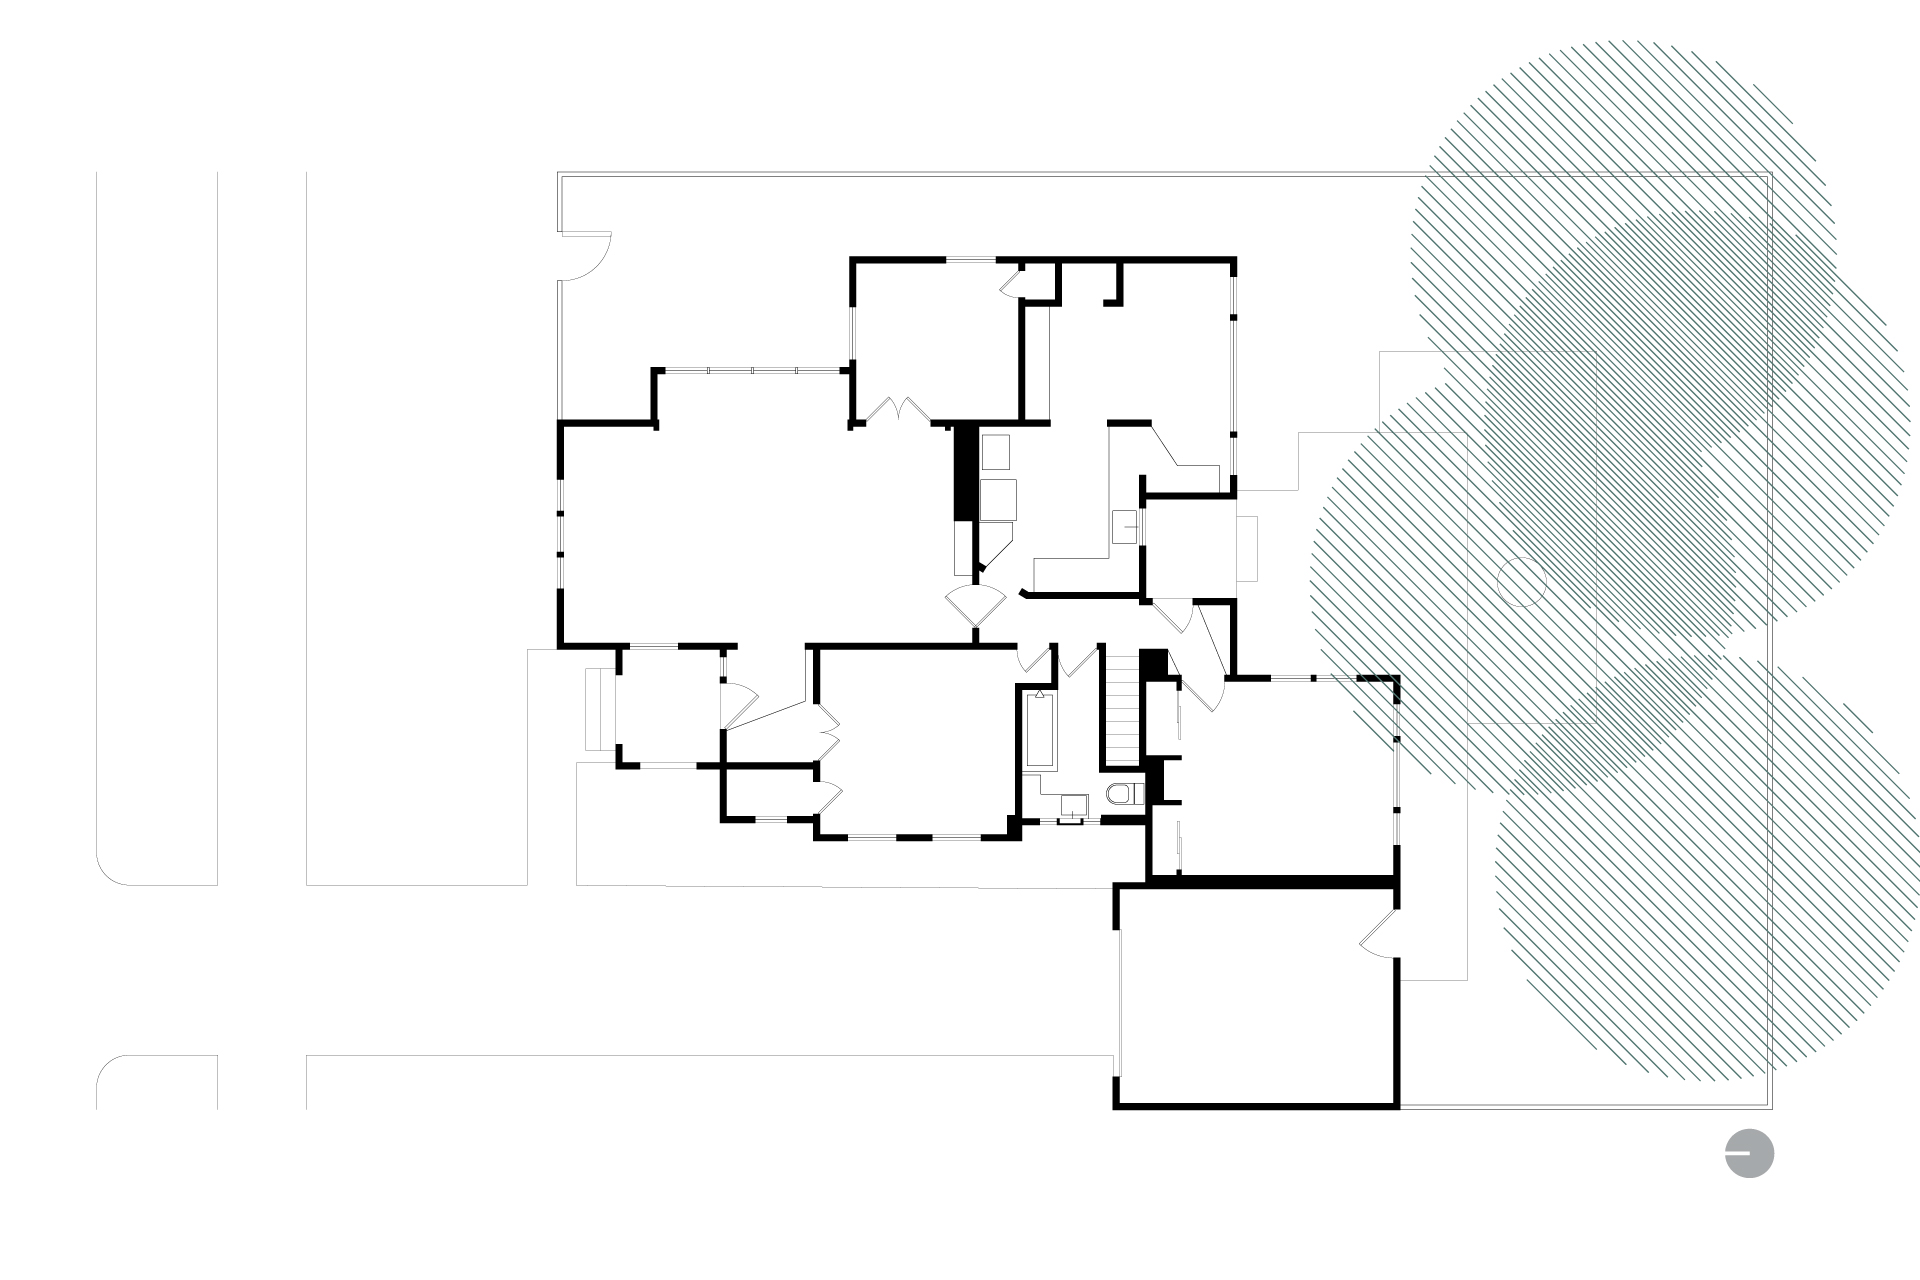 This is a floor plan drawing of the Little Prescott House before being renovated.